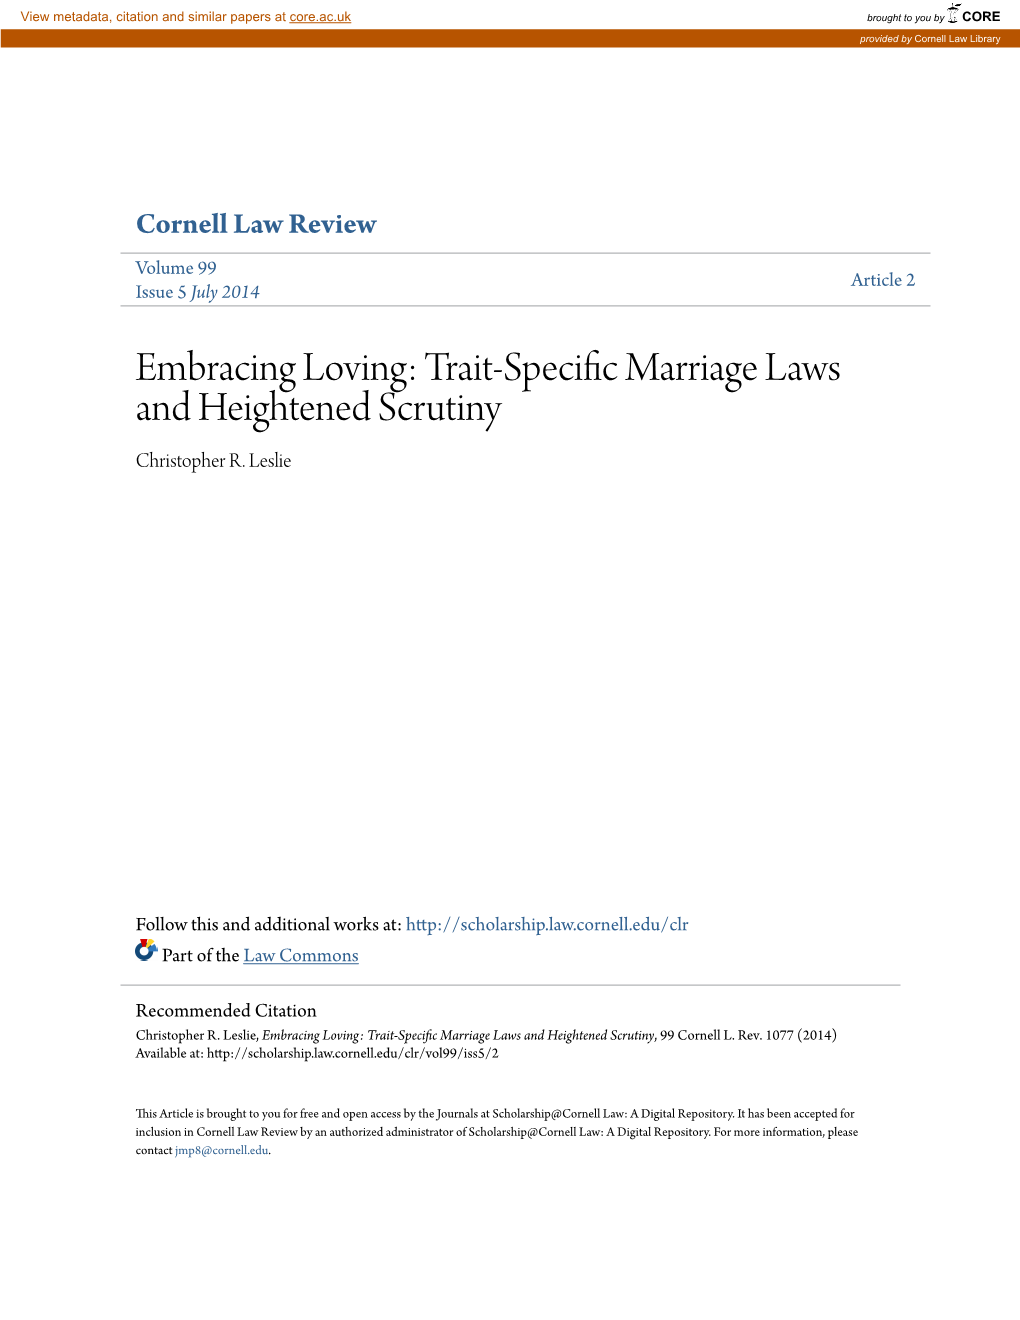 Trait-Specific Marriage Laws and Heightened Scrutiny